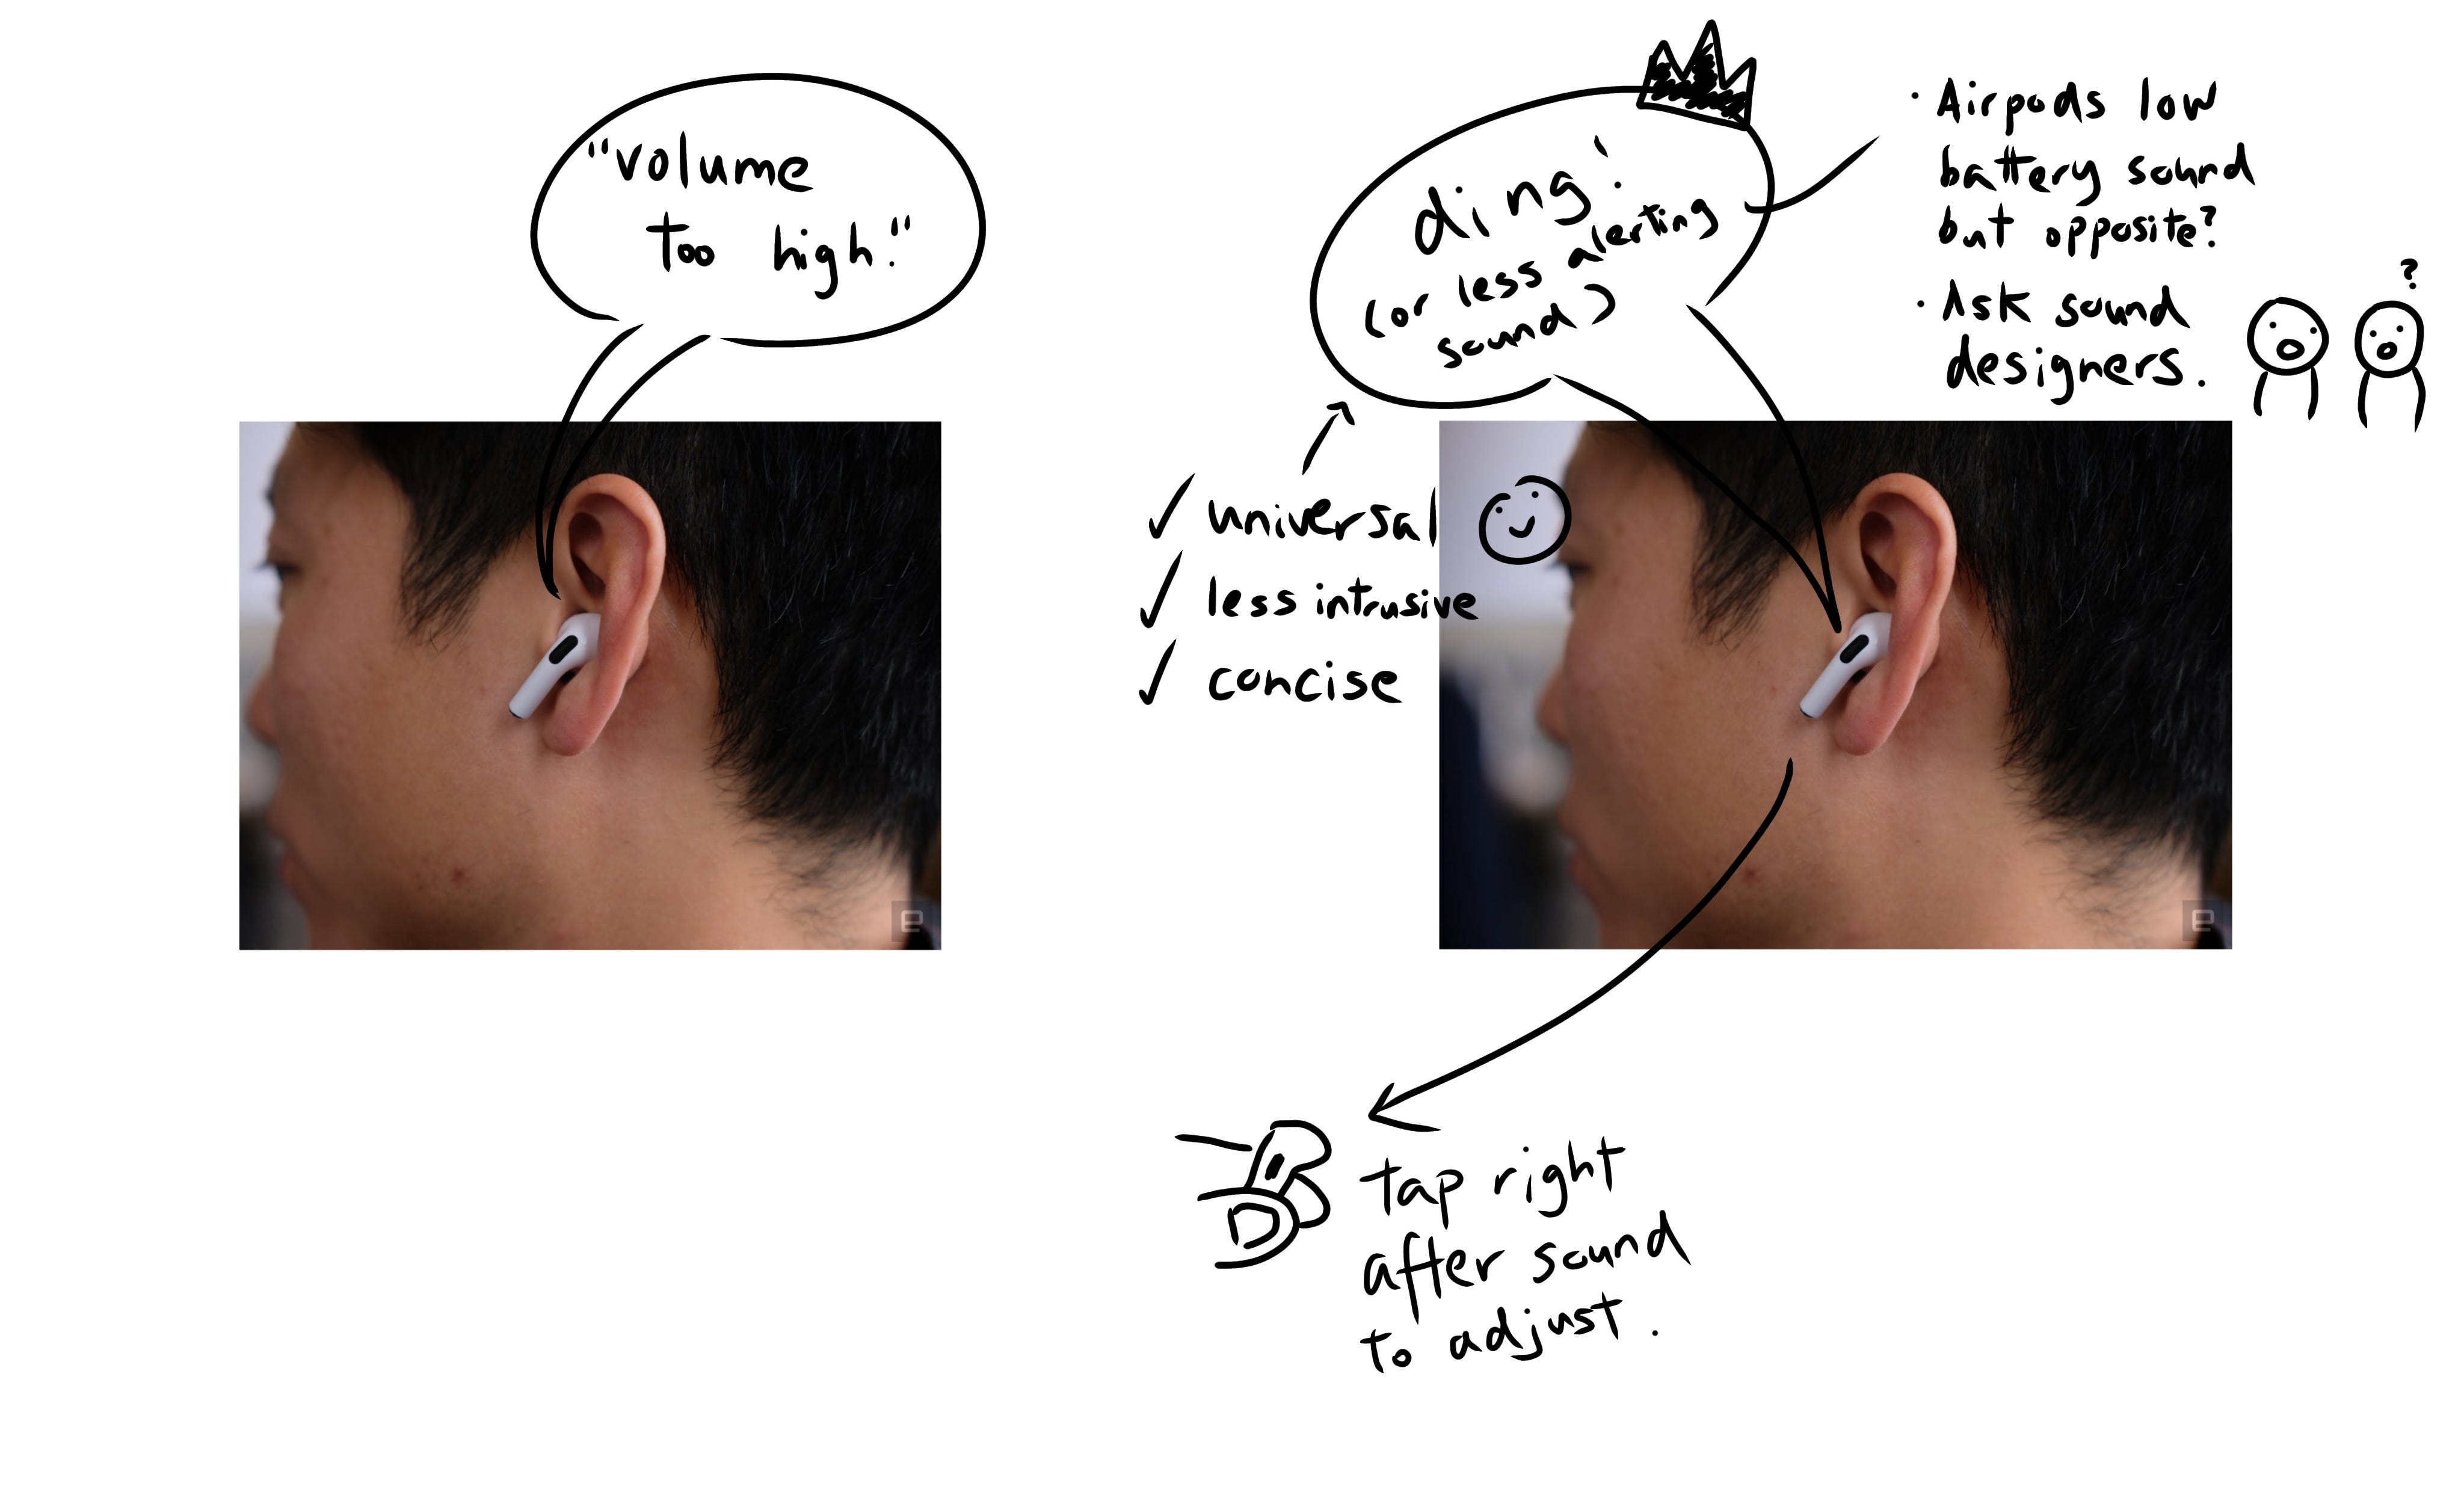 airpods losing sound in one ear Off 73% - www.gmcanantnag.net